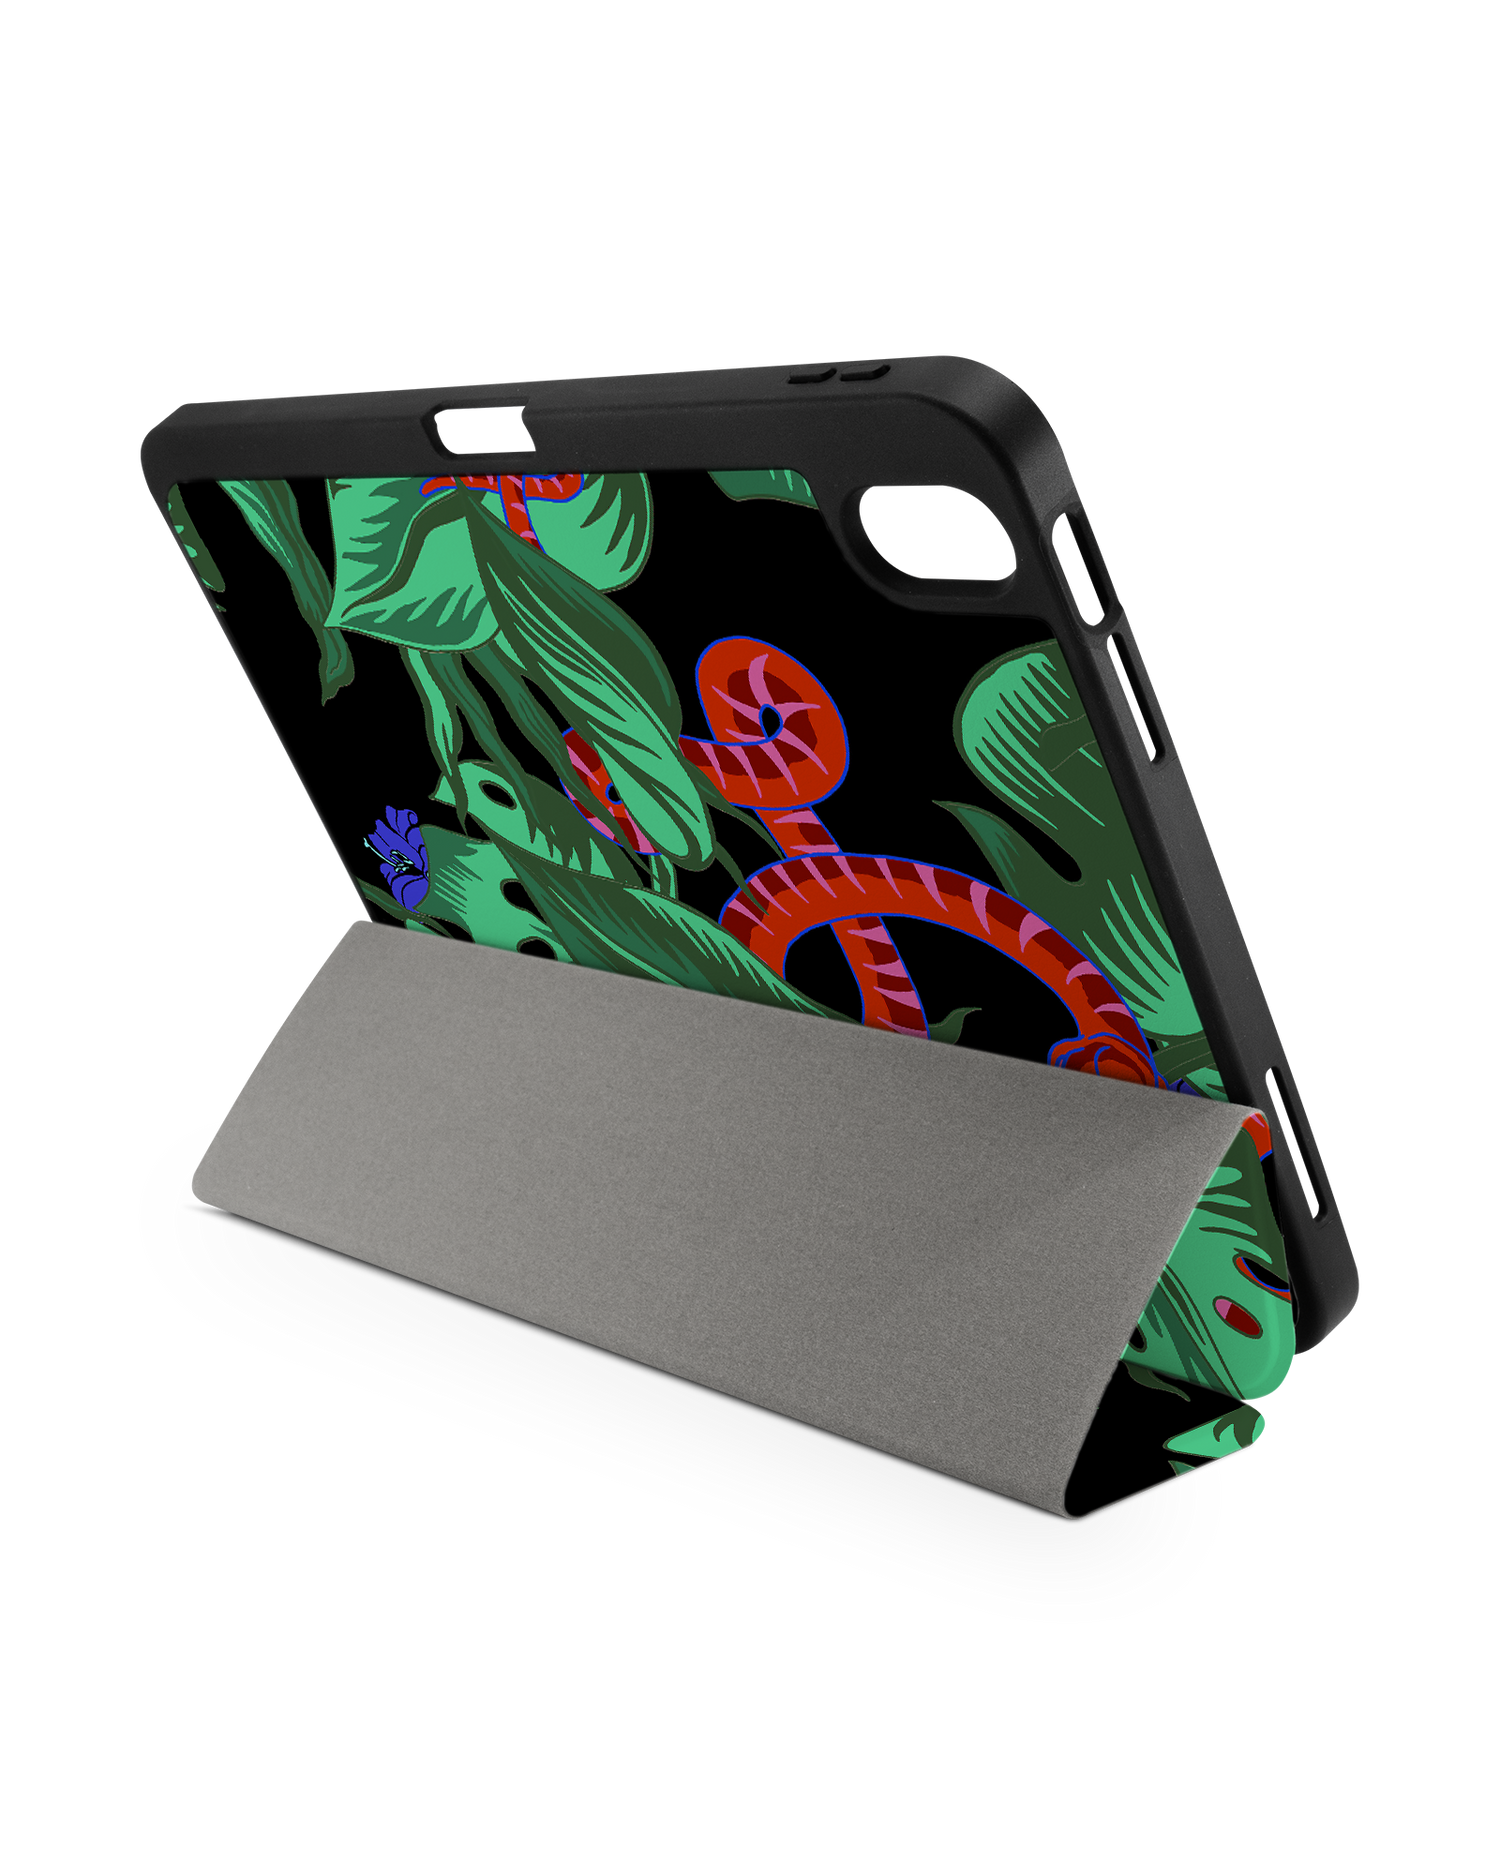 Tropical Snakes iPad Case with Pencil Holder for Apple iPad (10th Generation): Set up in landscape format (back view)